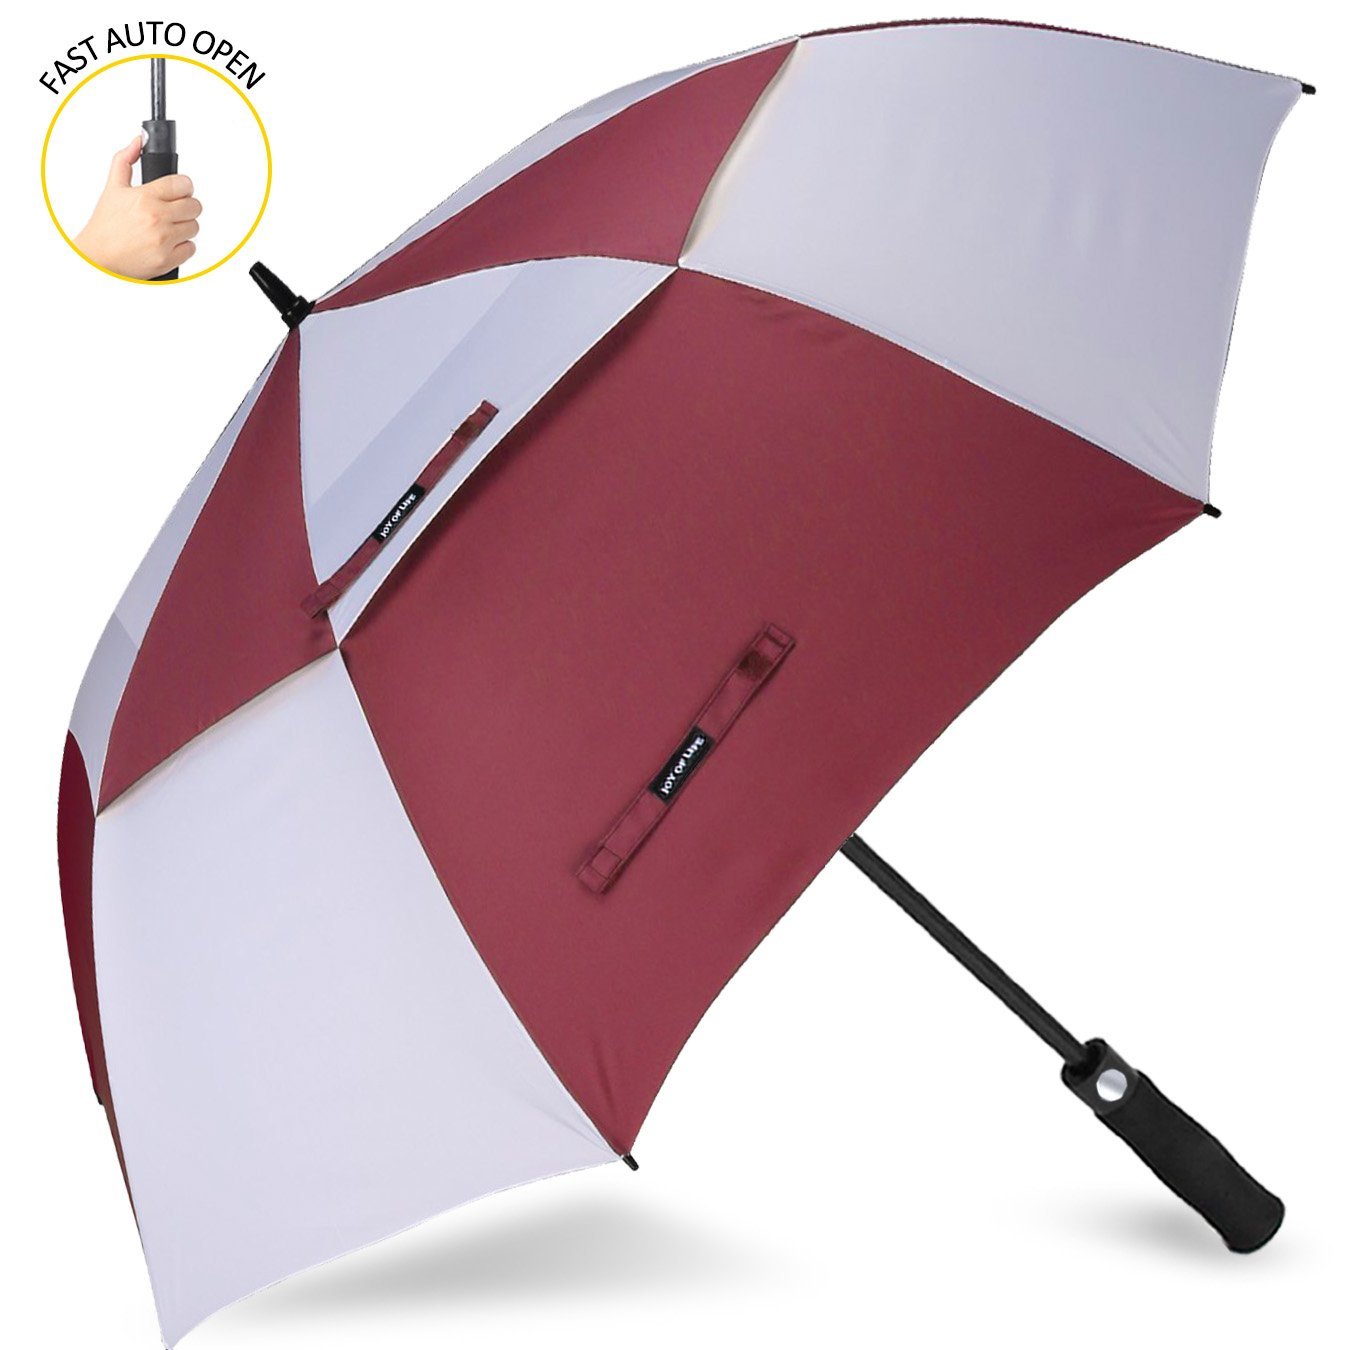 Zomake Automatic Open Windproof Double Canopy Golf Umbrellas